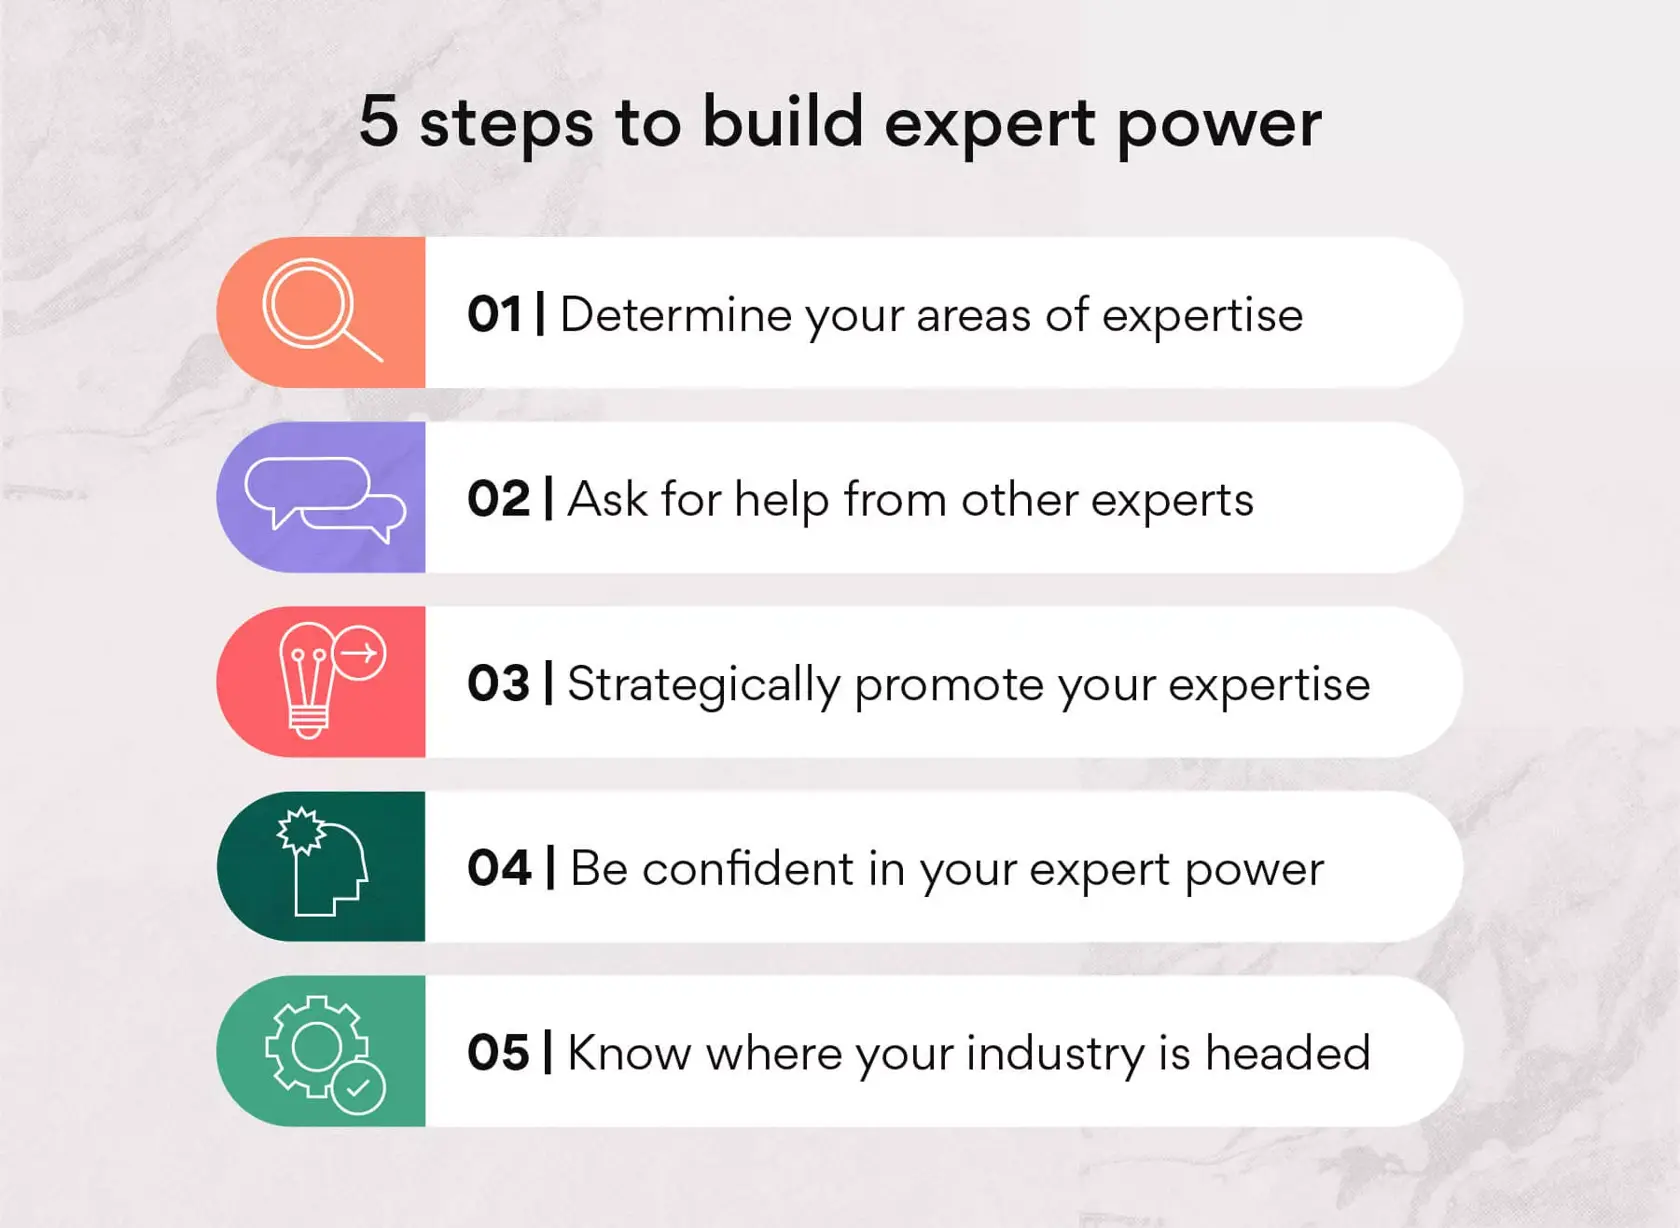 5 steps to build expert power